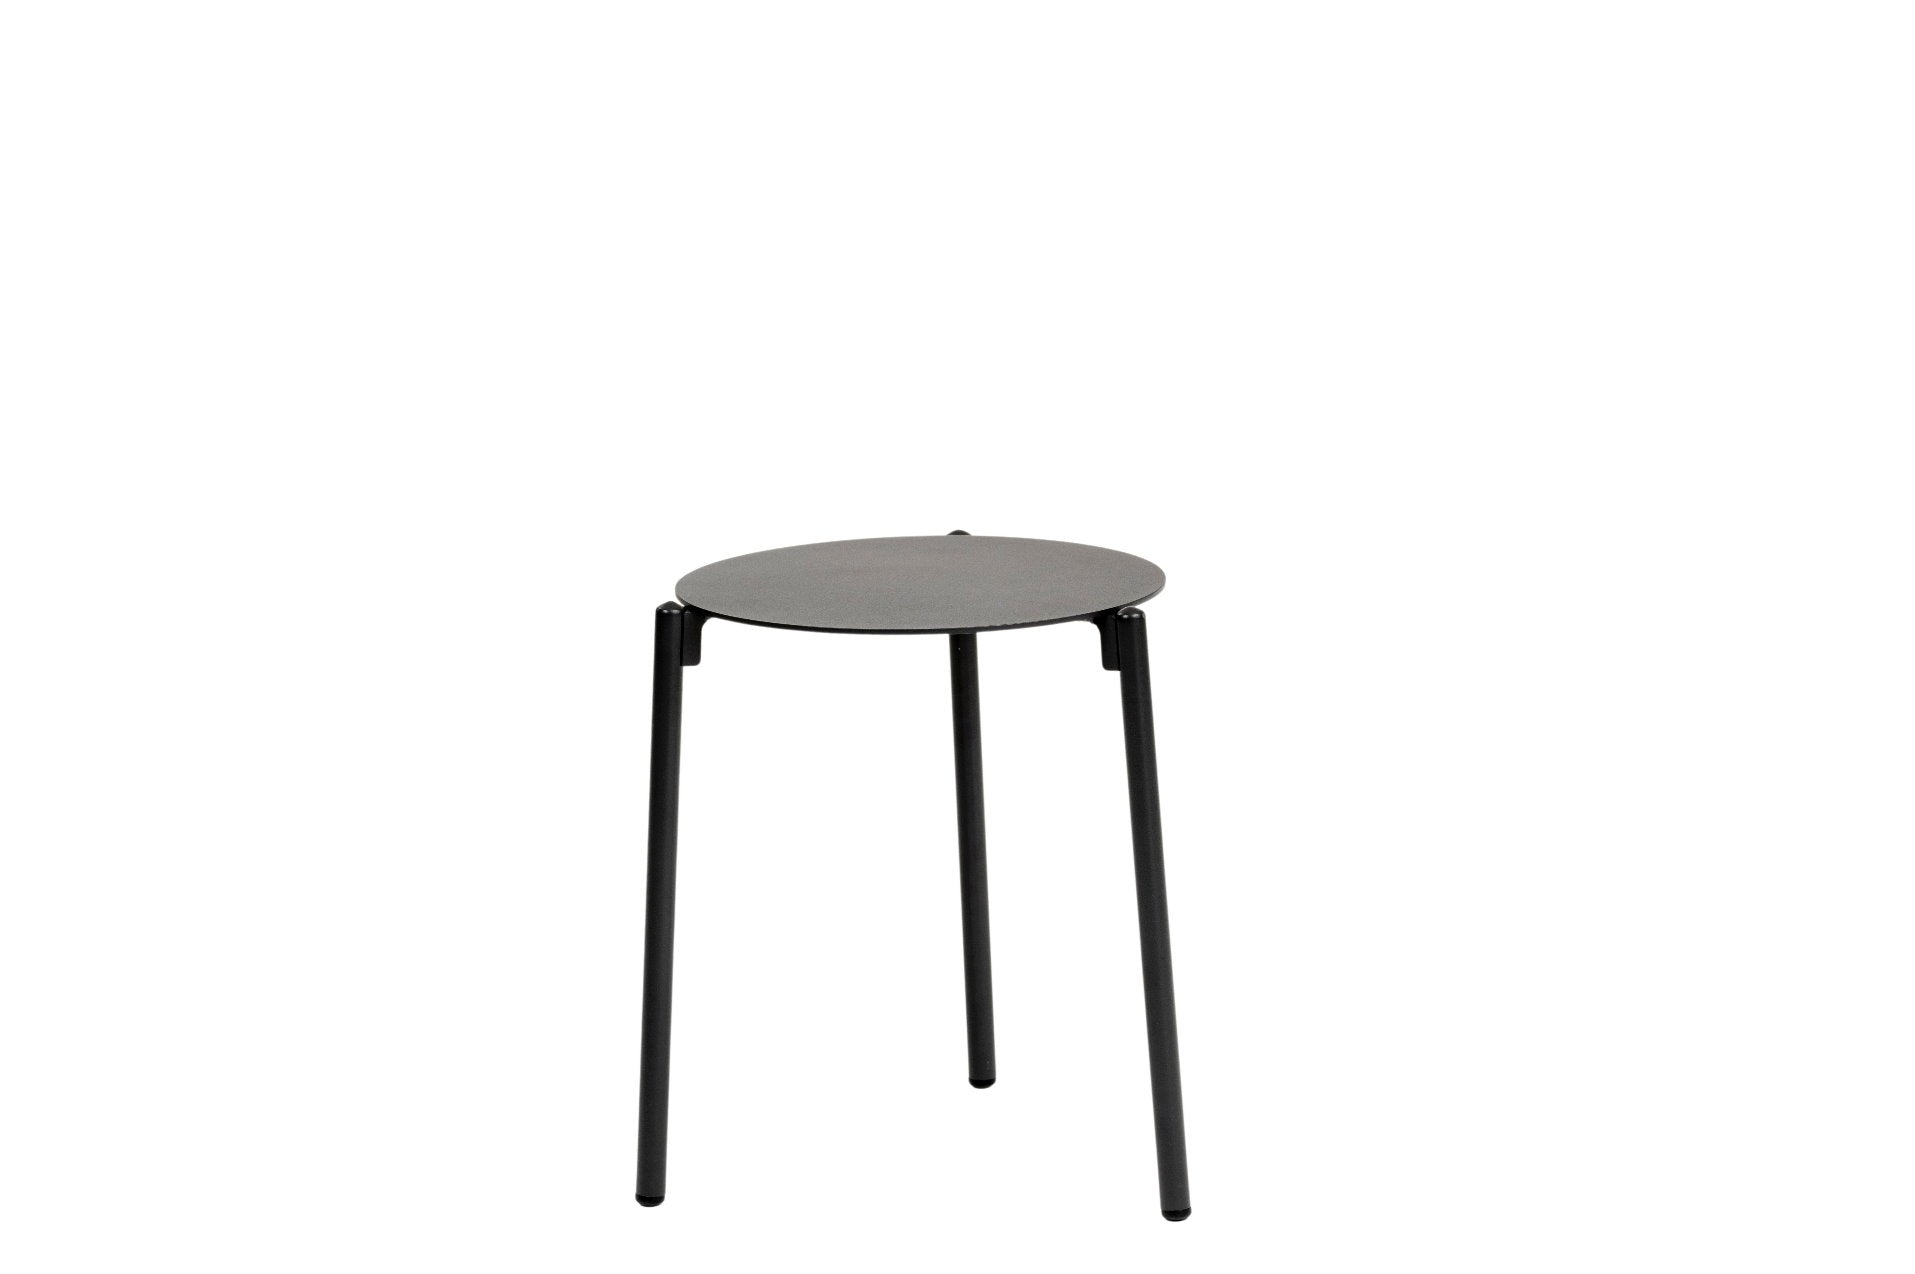 Diego side table